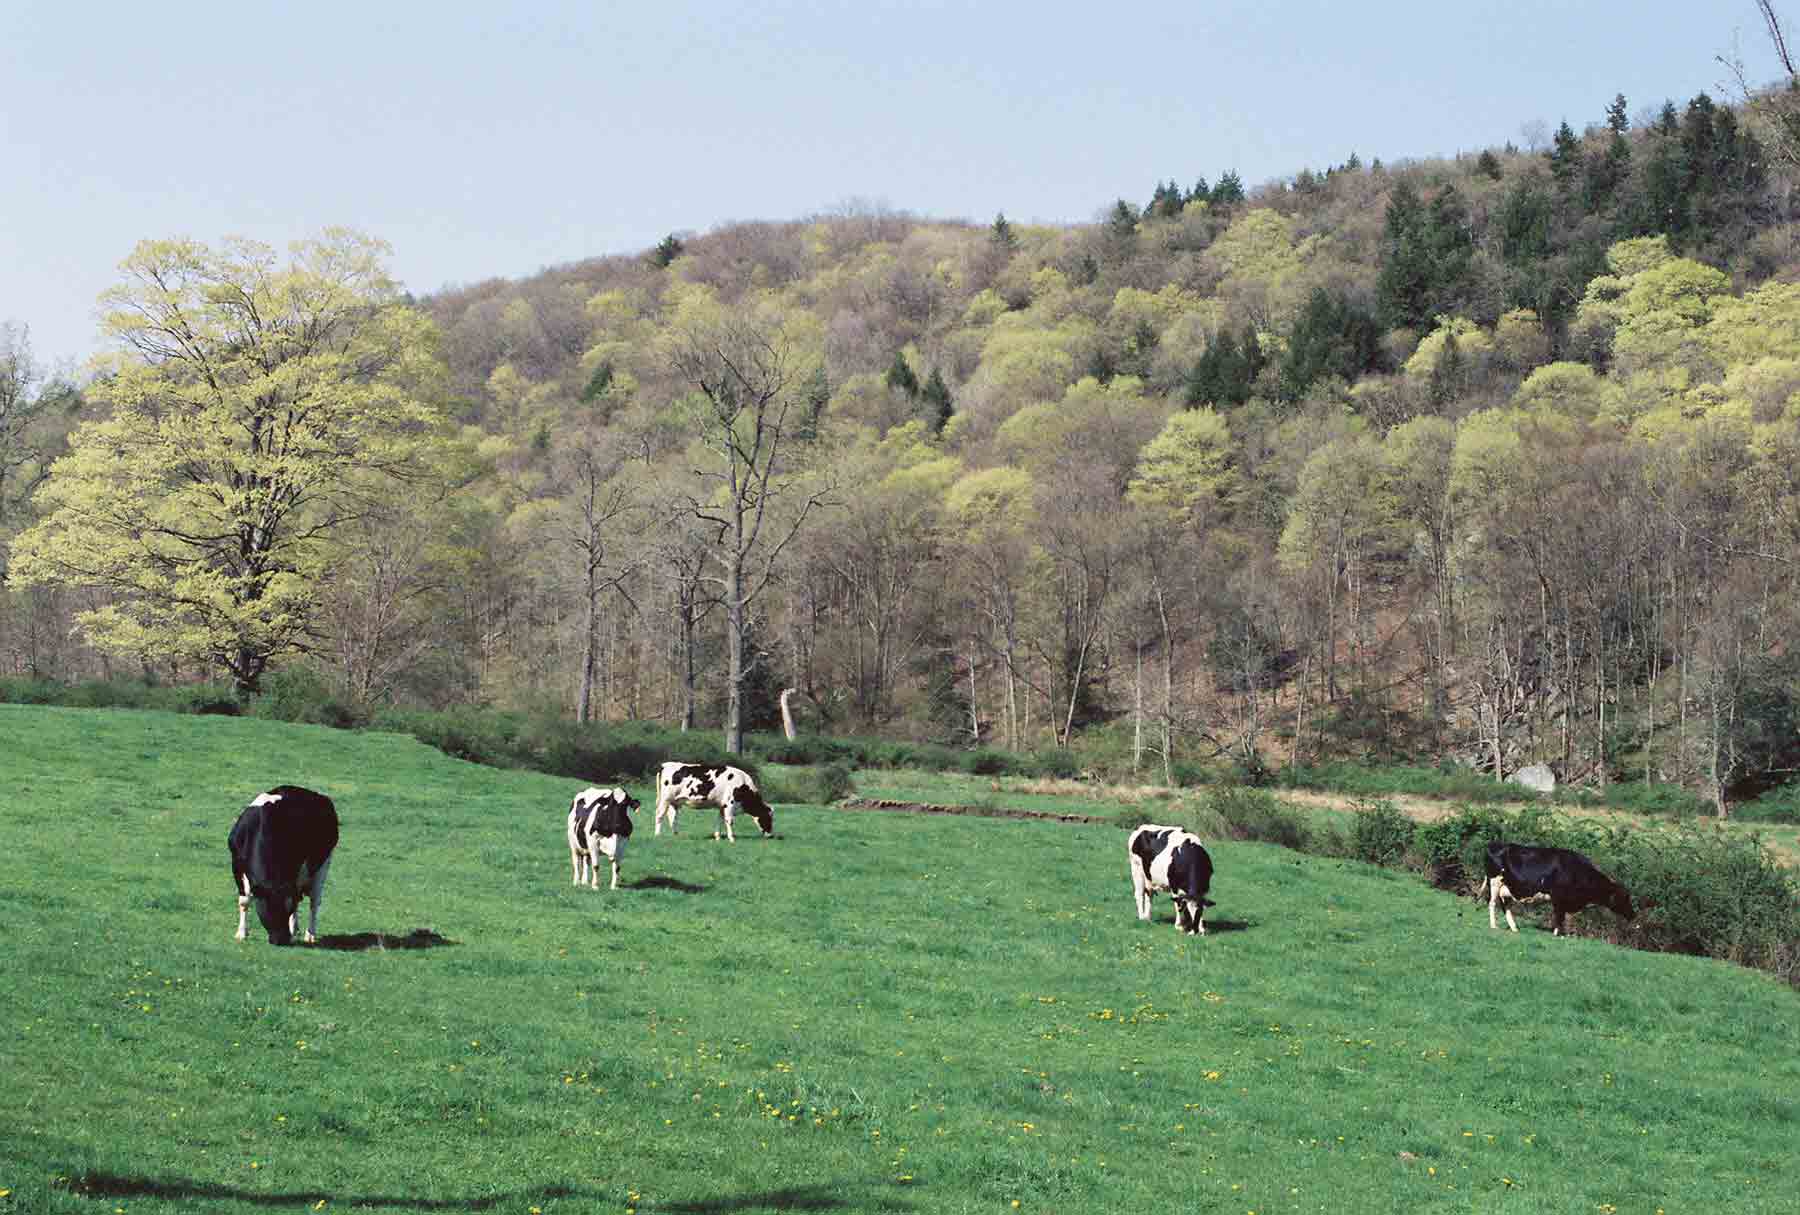 mm 11.0 - Cows in field just north CT 341 near Kent. The AT crosses this field.  Courtesy dlcul@conncoll.edu